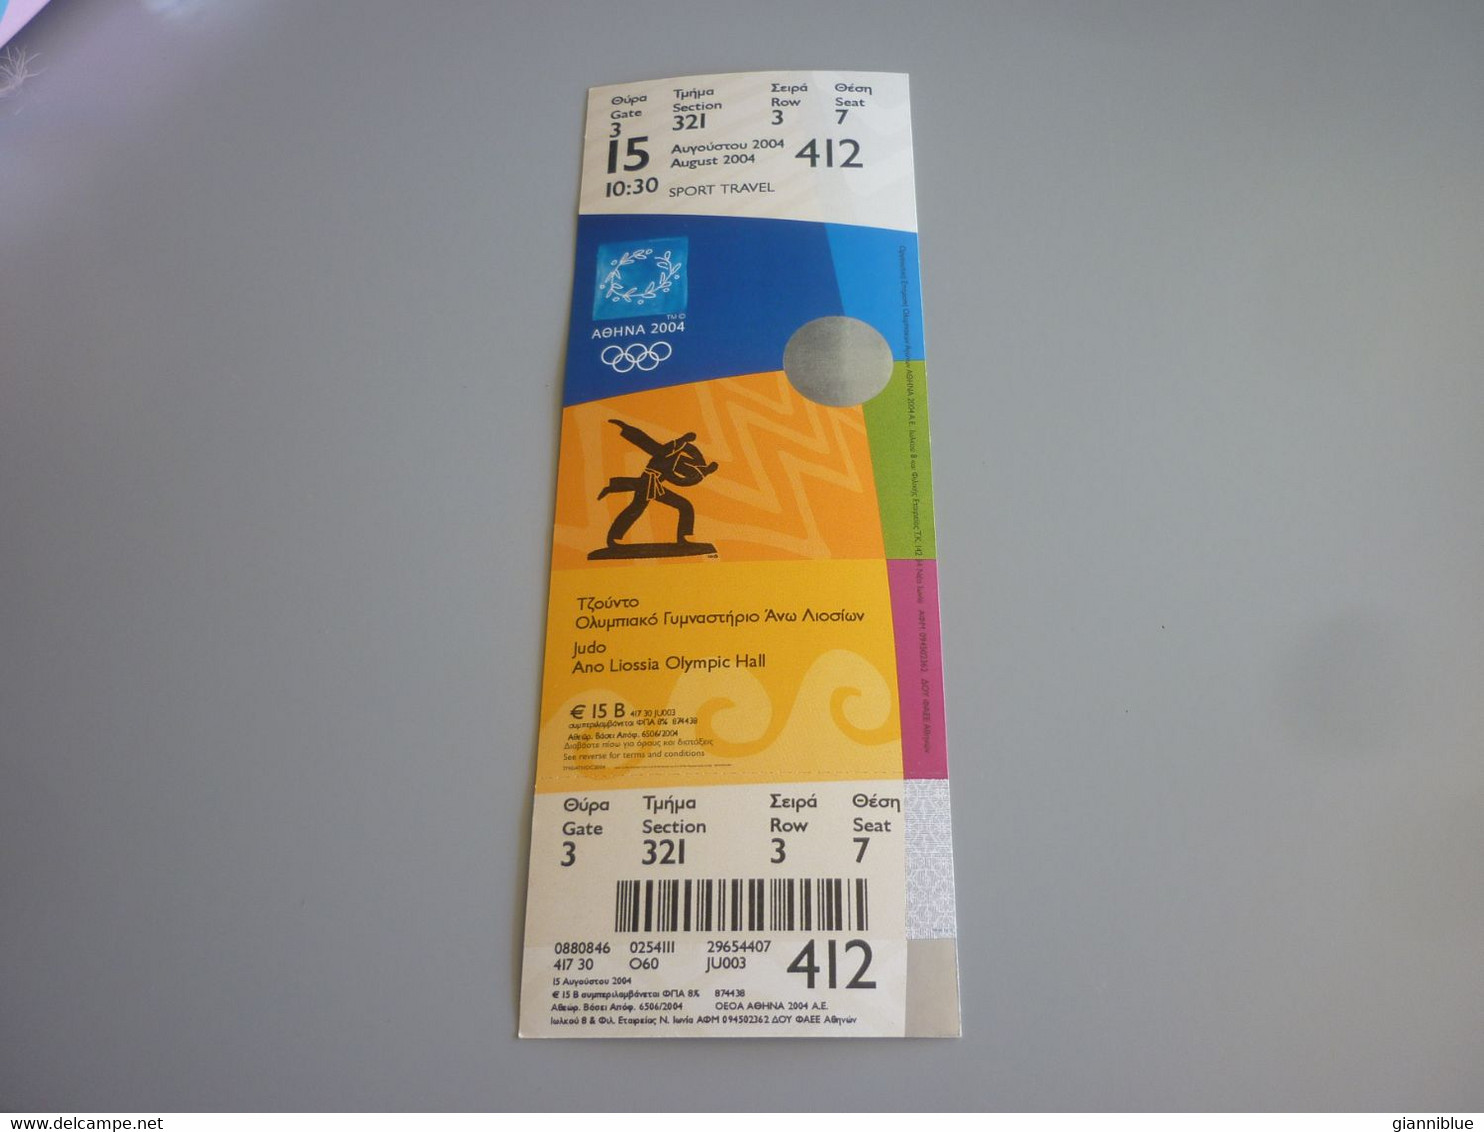 Judo Athens 2004 Olympic Games Greece Greek Mint Unused Match Ticket Stub 15/08/2004 10:30 #412 - Apparel, Souvenirs & Other